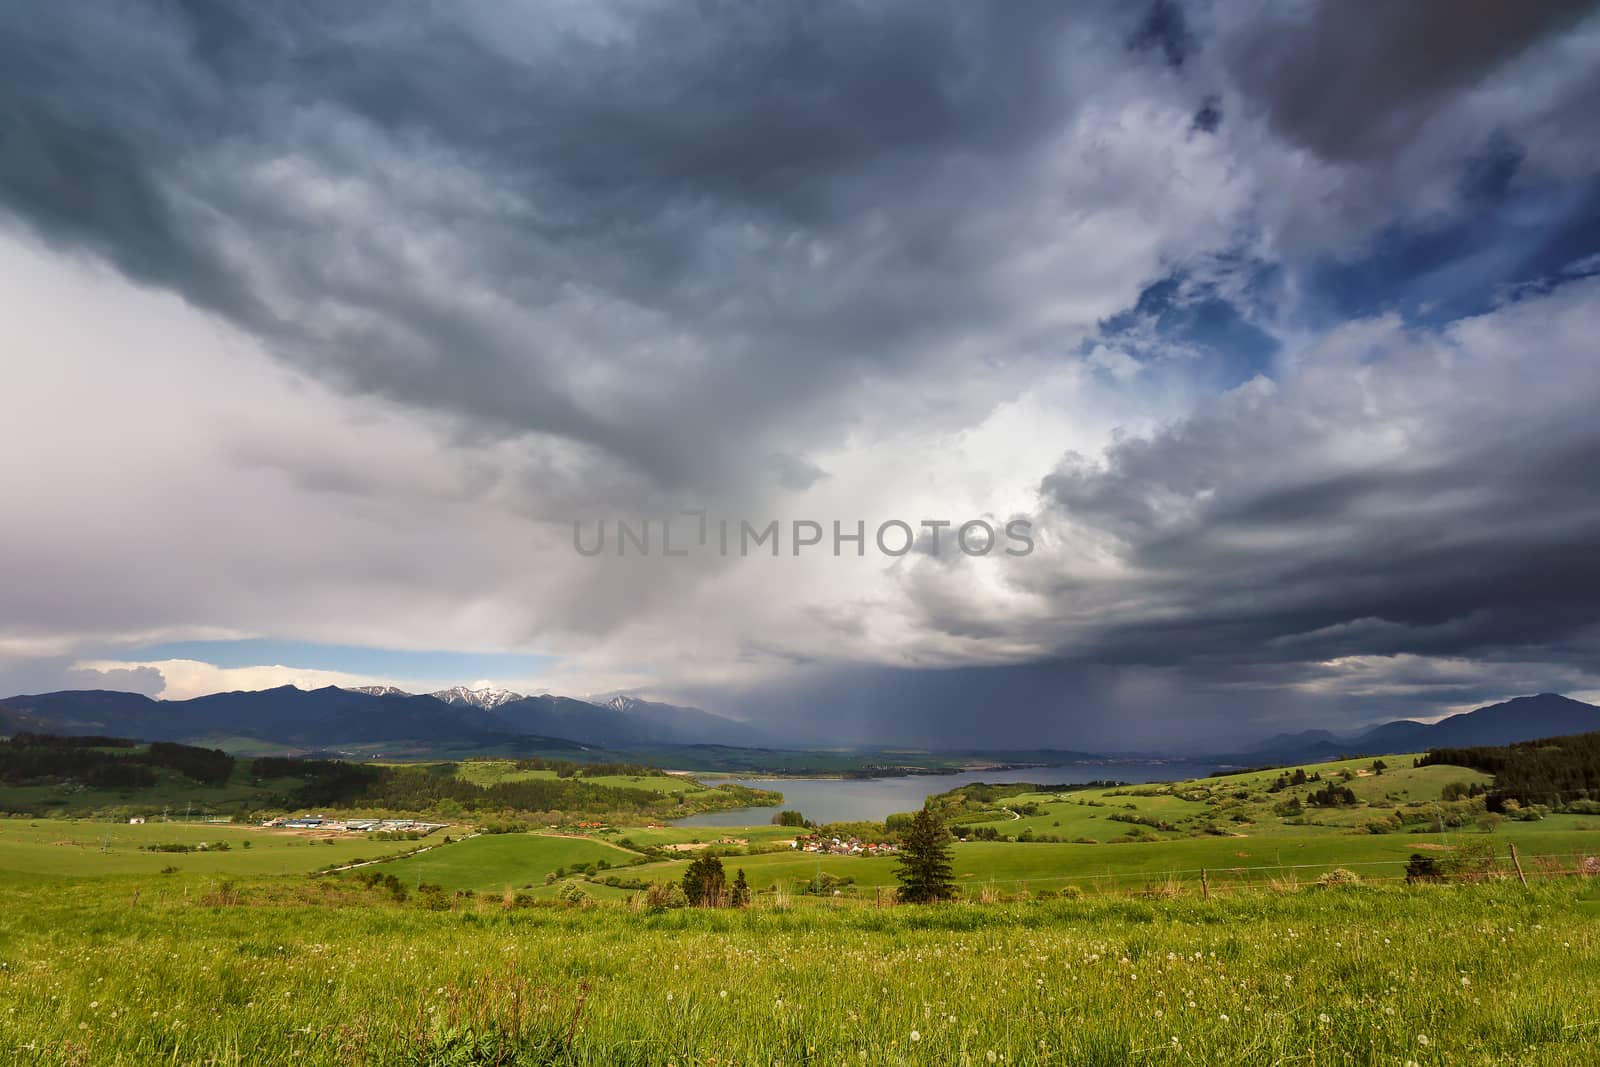 Spring rain and storm in mountains. Green spring hills of Slovakia. Spring stormy scene